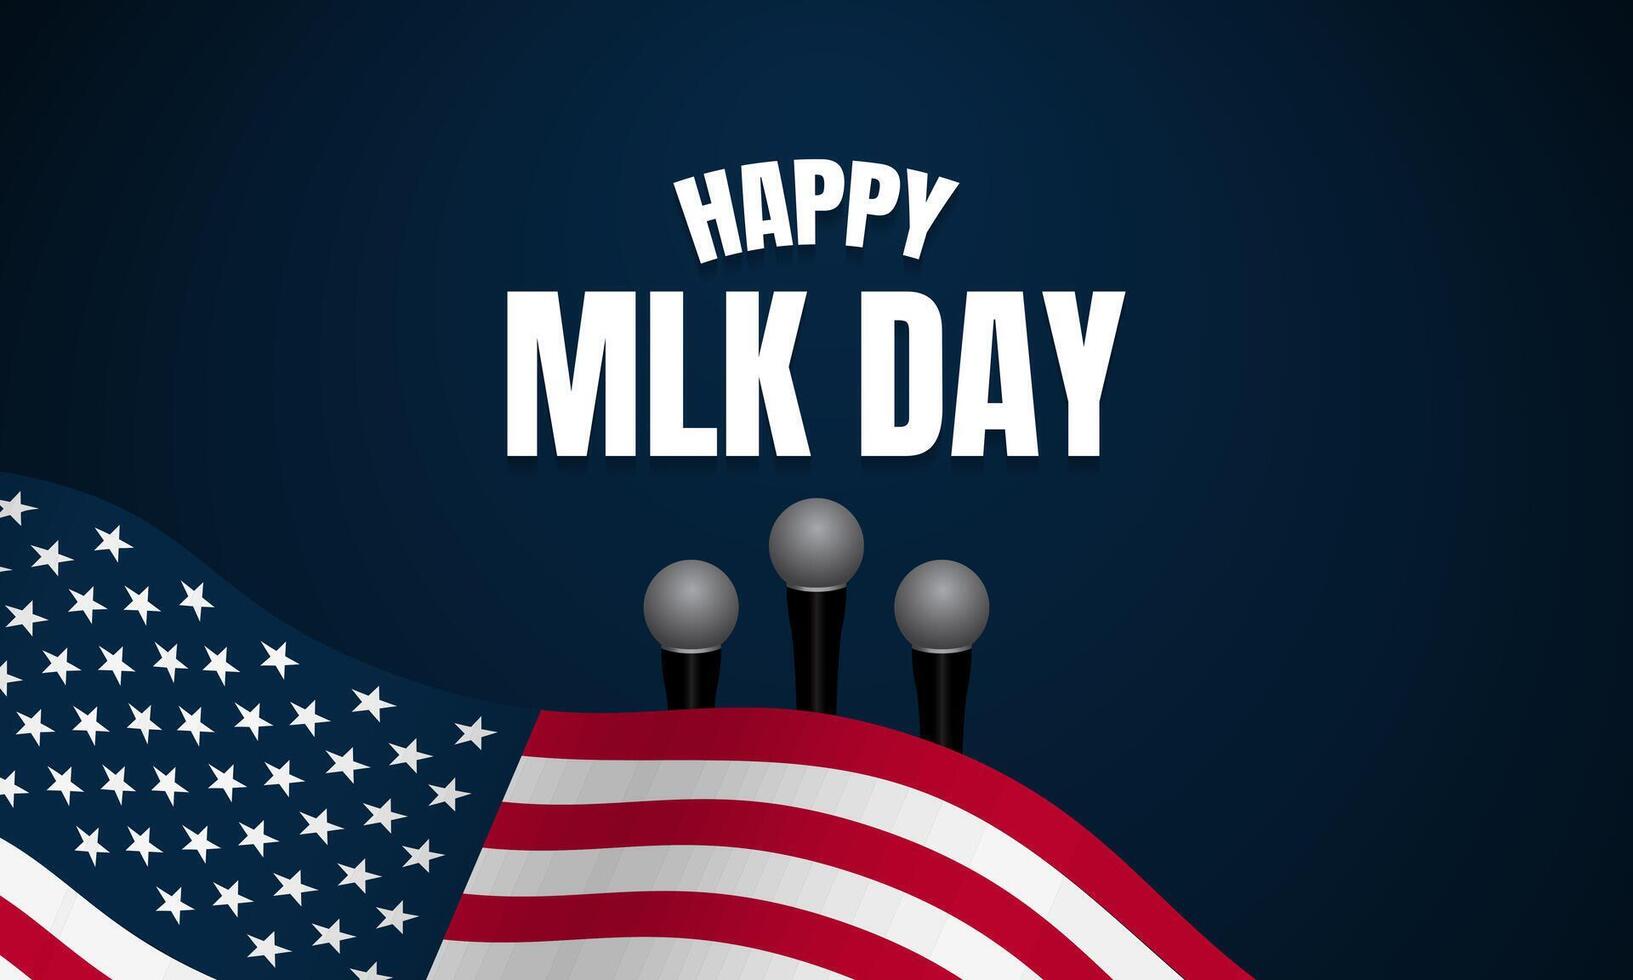 MLK Day Background Design with Microphone Illustration and American Flag. vector